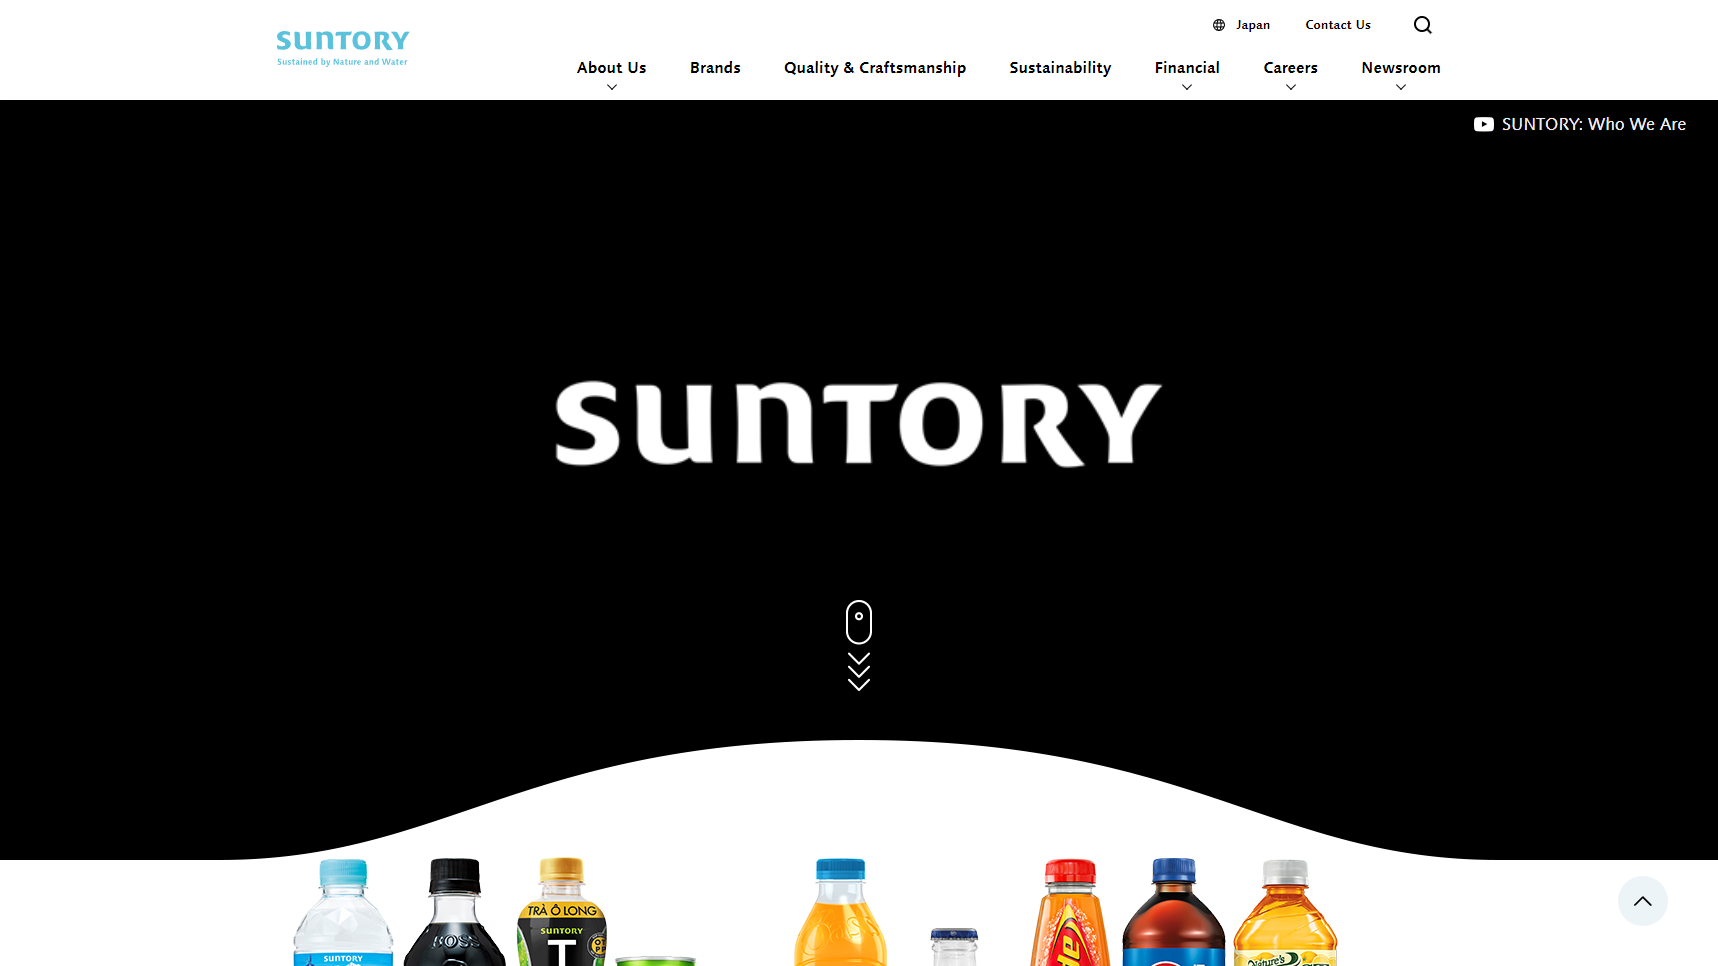 Suntory - Canned Drinks Manufacturer